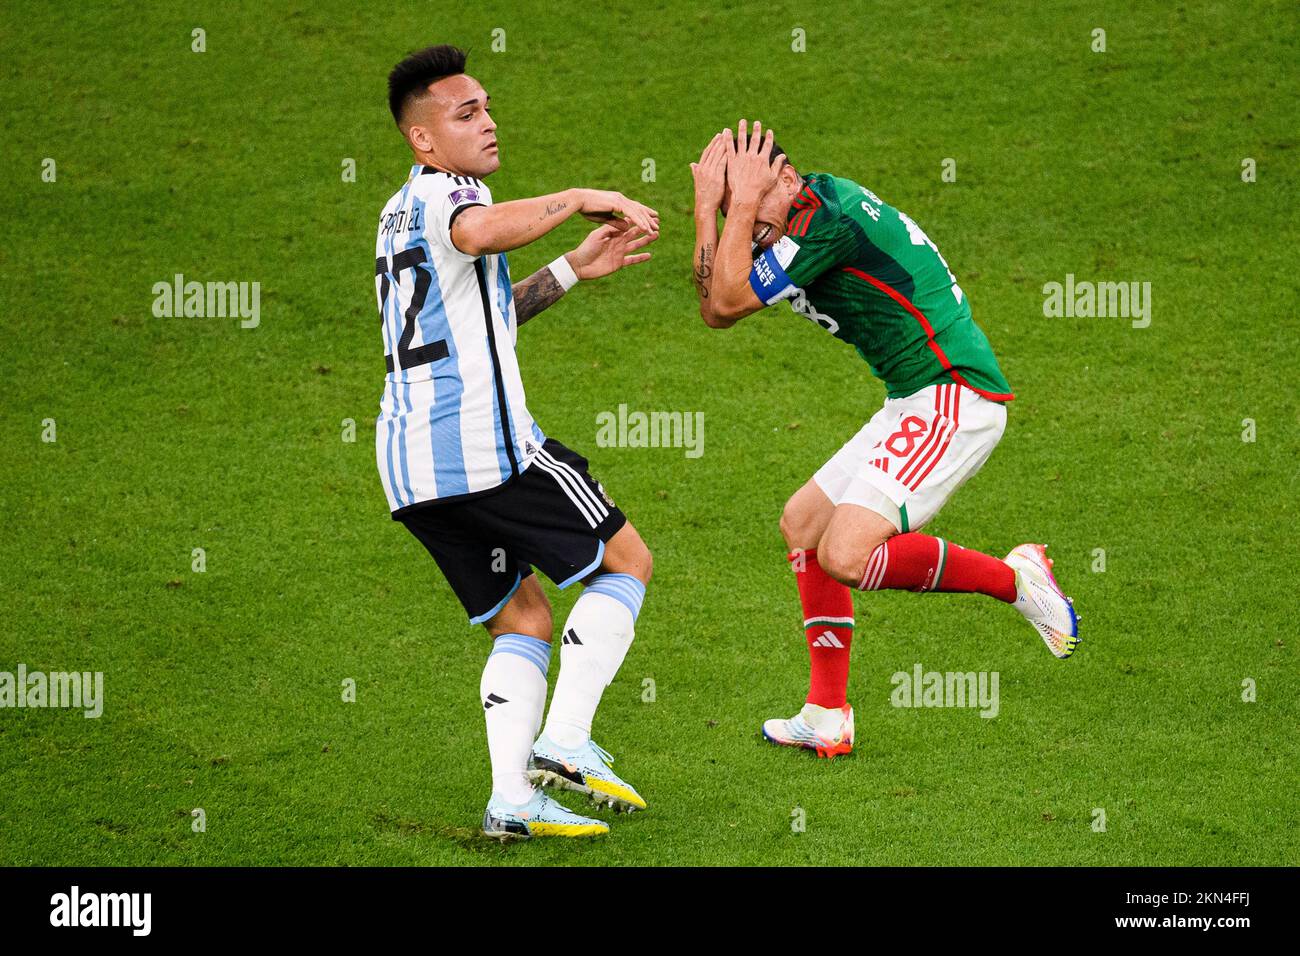 Lusail, Qatar. 14th Sep, 2022. Lusail, Qatar, Nov 26th 2022: Lautaro Martinez of Argentina and Andres Guardado of Mexico during a match between Argentina vs Mexico, valid for the group stage of the World Cup, held at the Estadio Nacional de Lusail in Lusail, Qatar. (Marcio Machado/SPP) Credit: SPP Sport Press Photo. /Alamy Live News Stock Photo